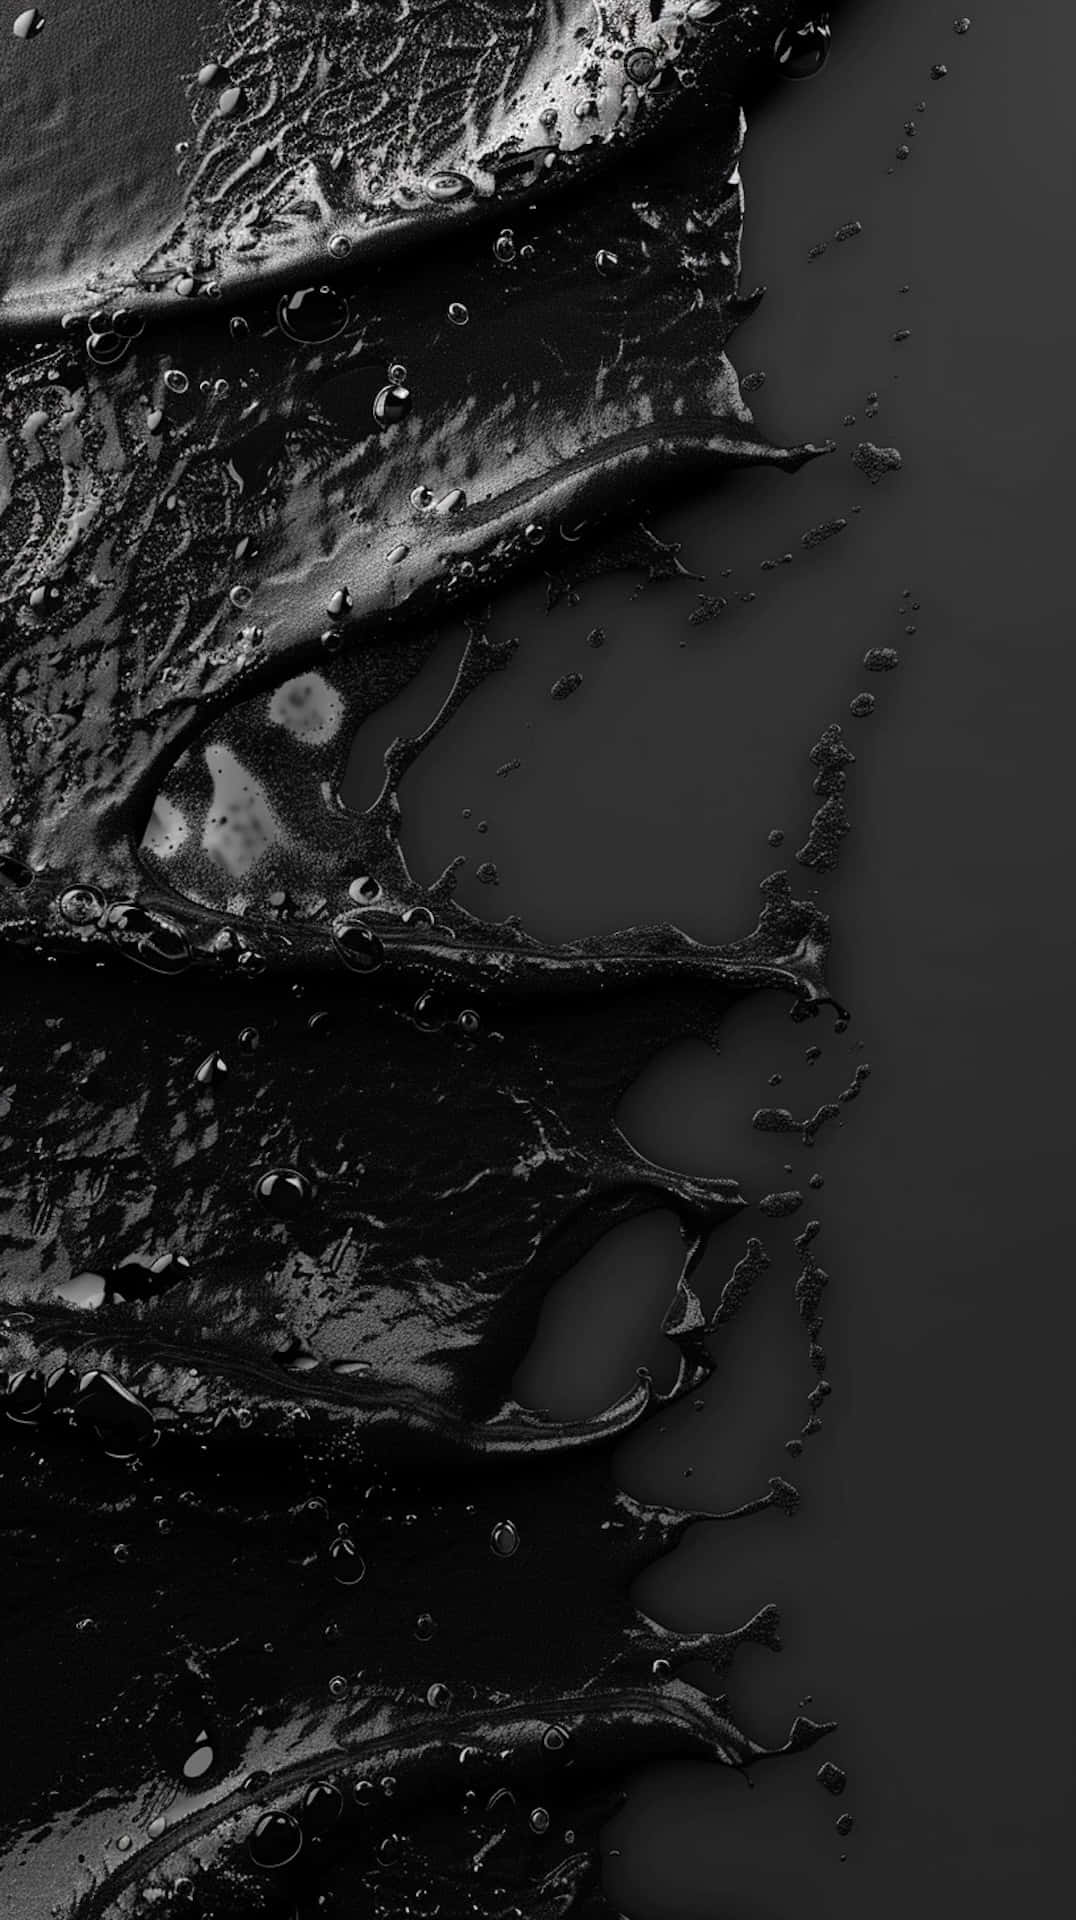 Abstract Black Water Dropletsoni Phone X R Wallpaper